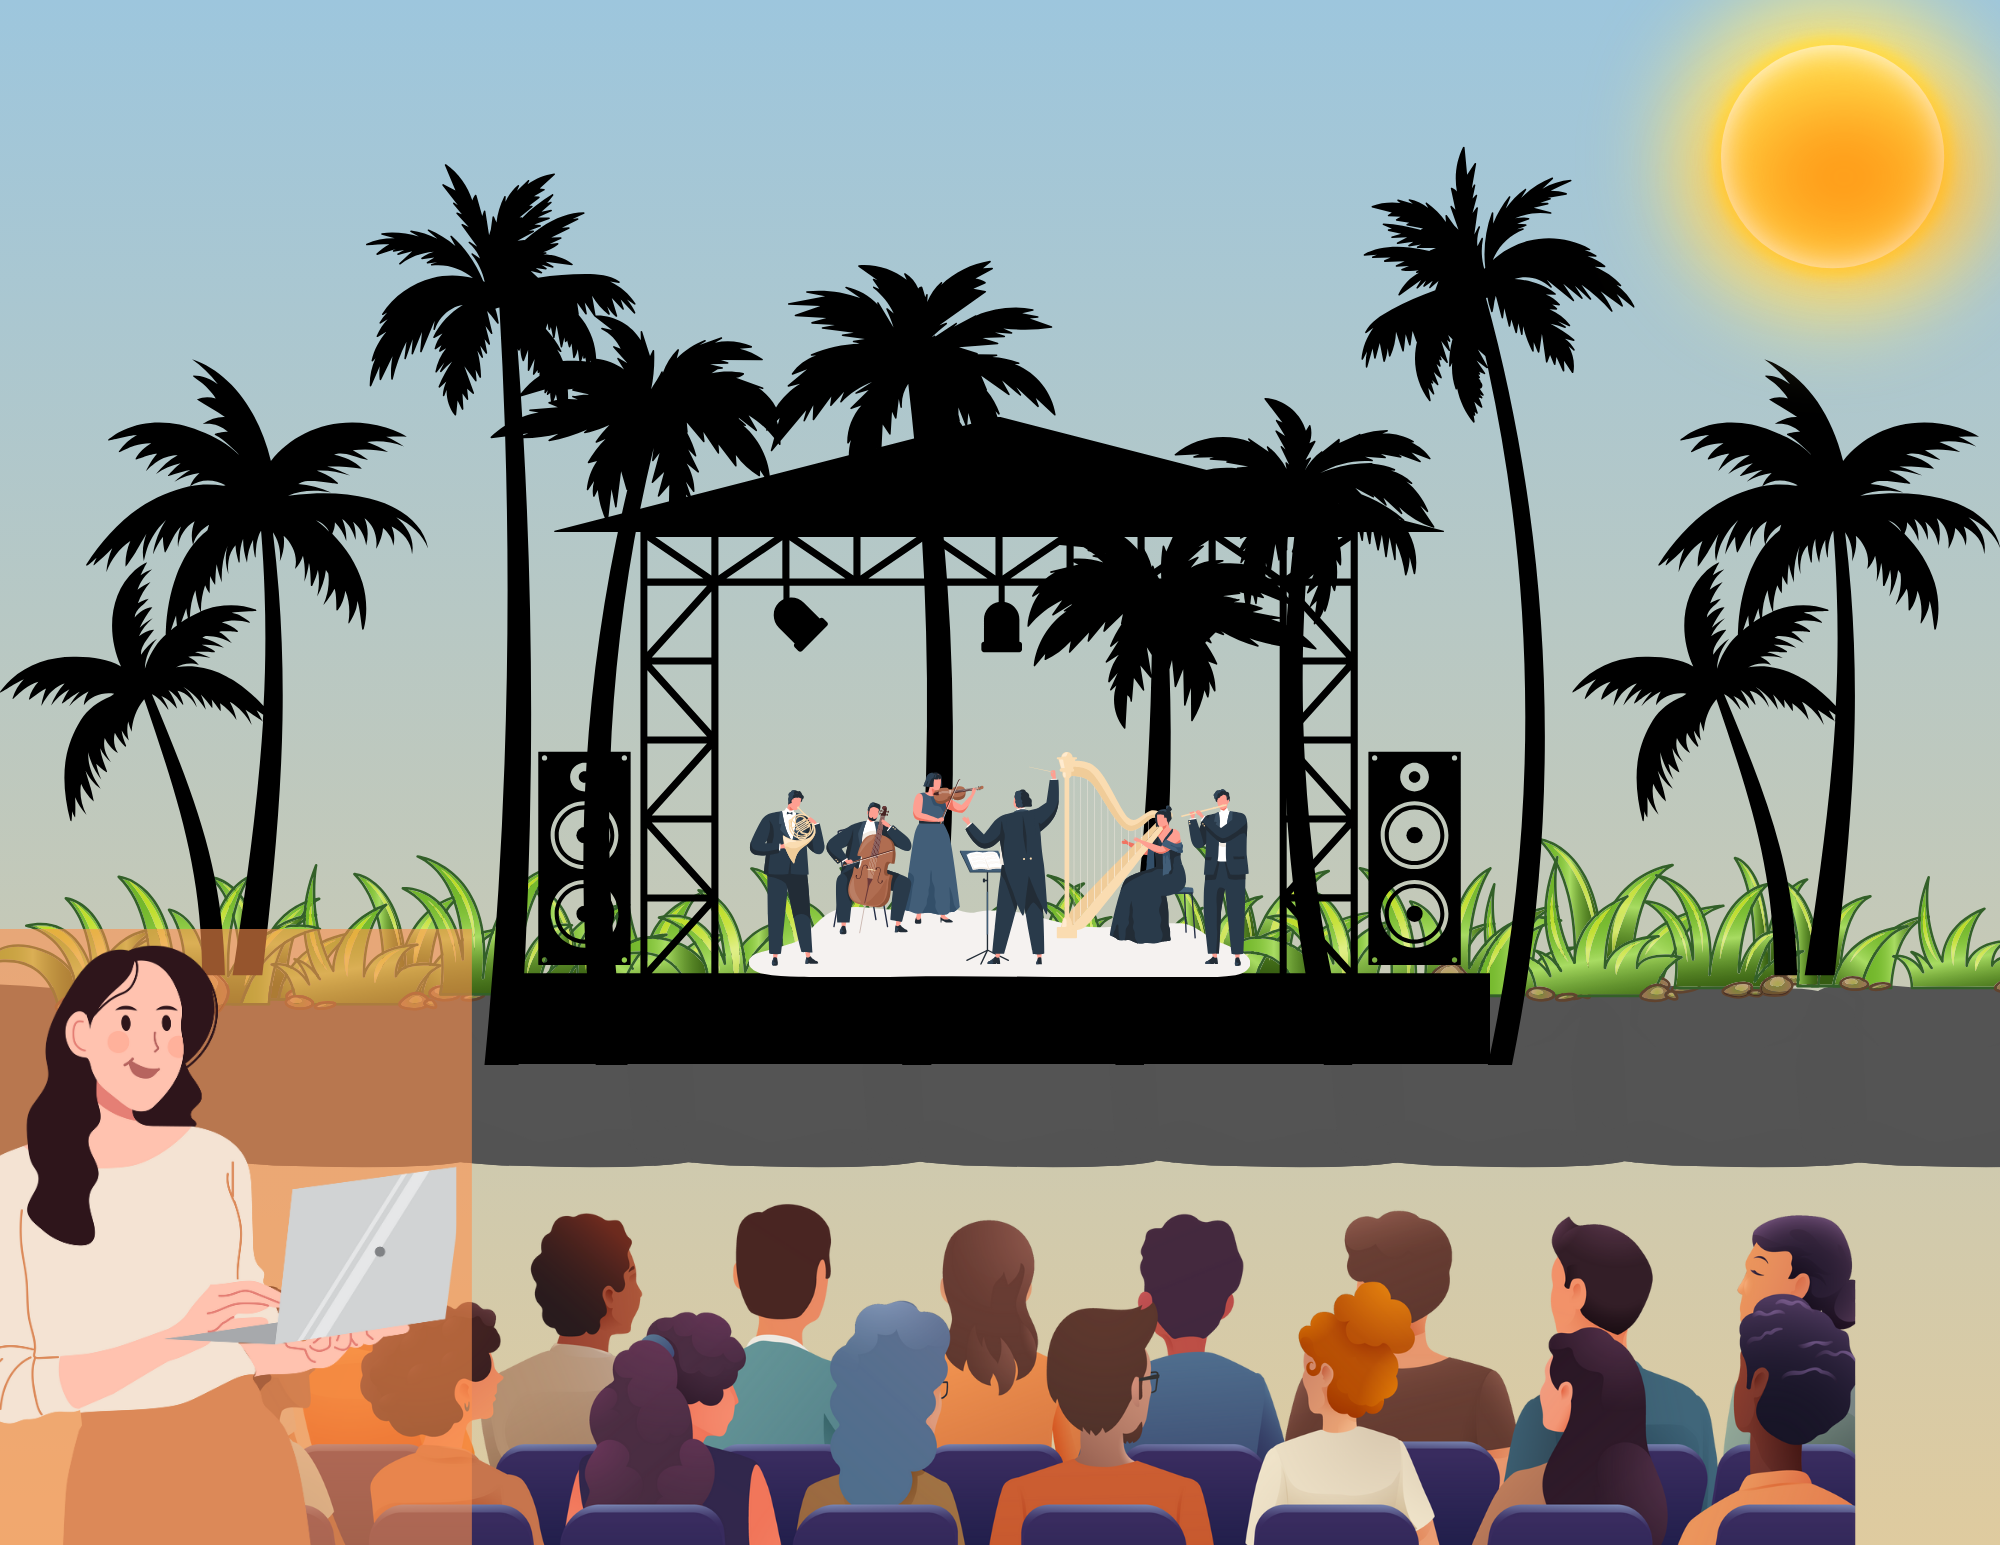 animated image of a stage and audience with palm trees behind the stage